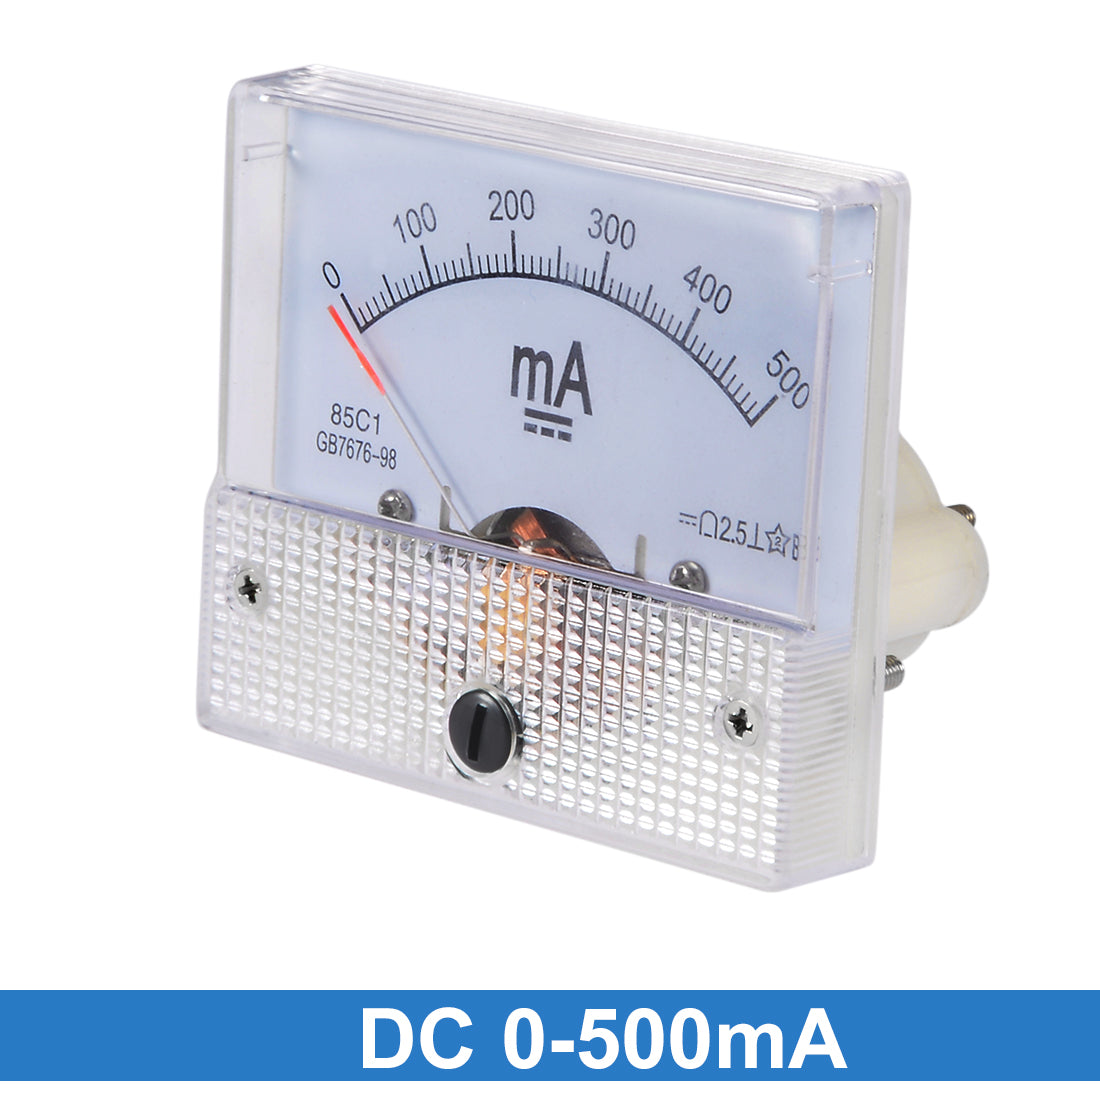 uxcell Uxcell 85C1 Analog Current Panel Meter DC 500mA Ammeter for Circuit Testing Ampere Tester Gauge 1 PCS